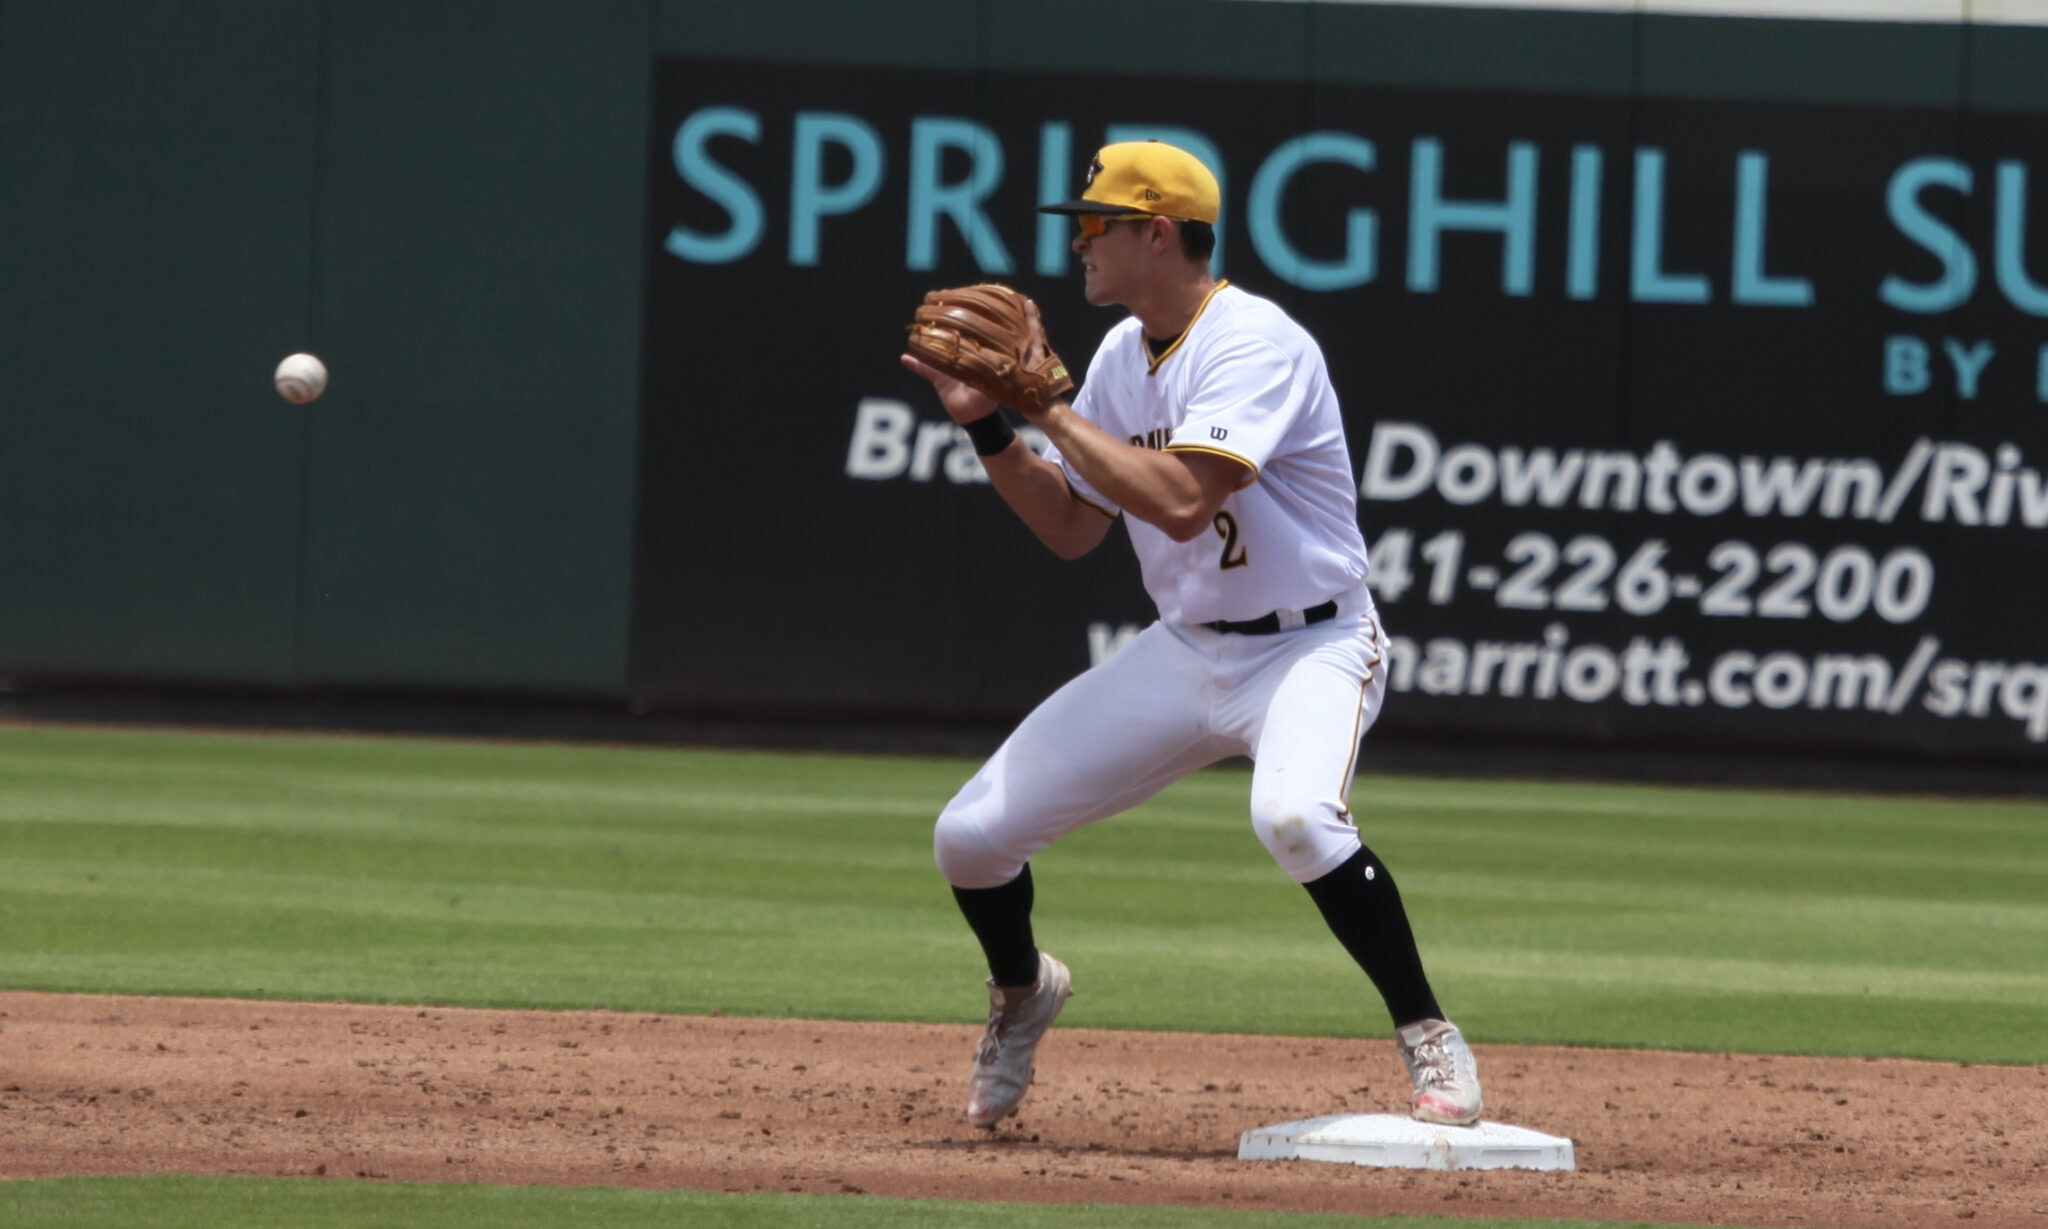 Coming in Hot: Jase Bowen is Having a Nice Start to His Spring